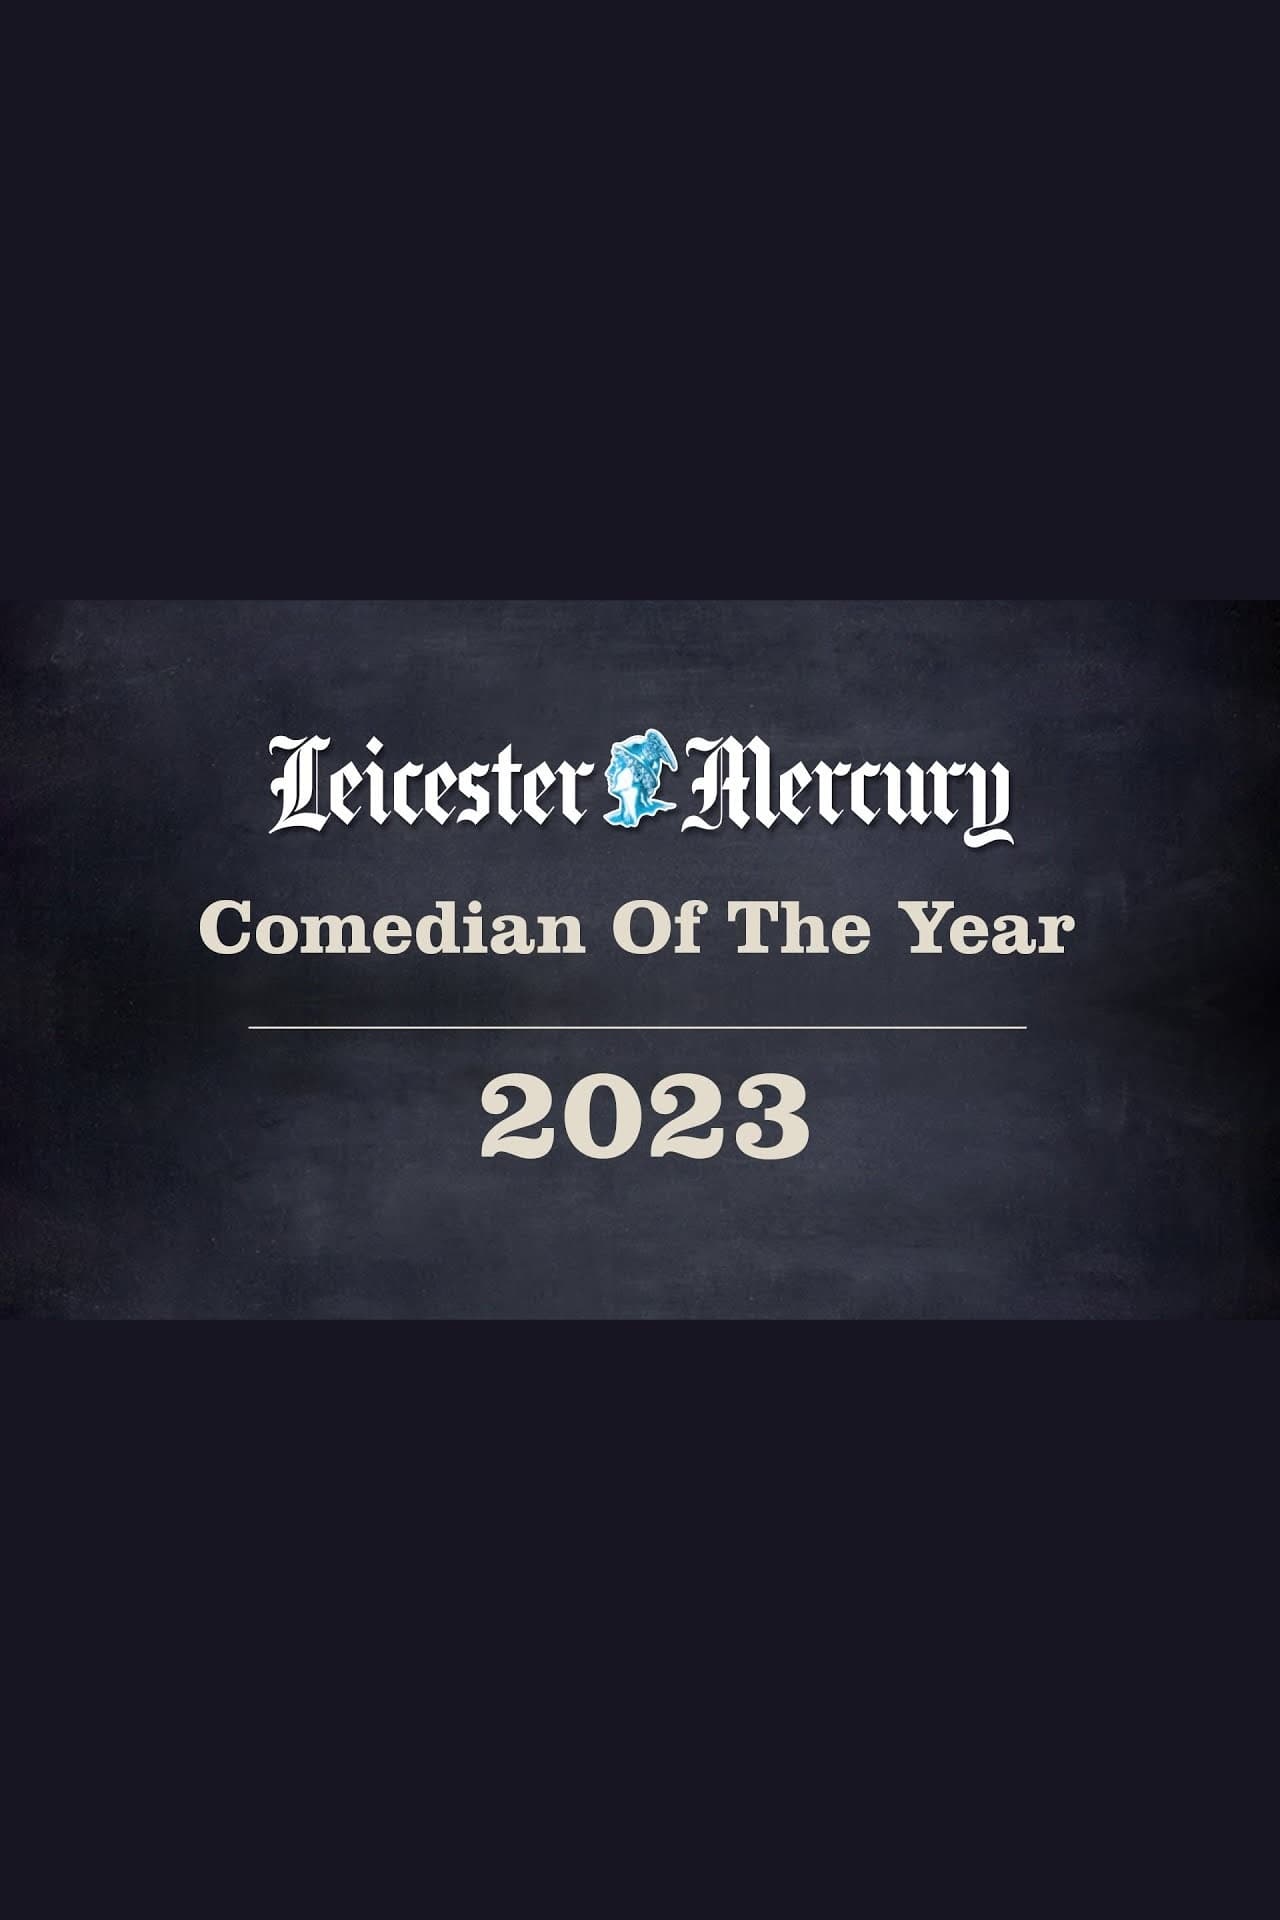 Leicester Mercury Comedian of the Year 2023